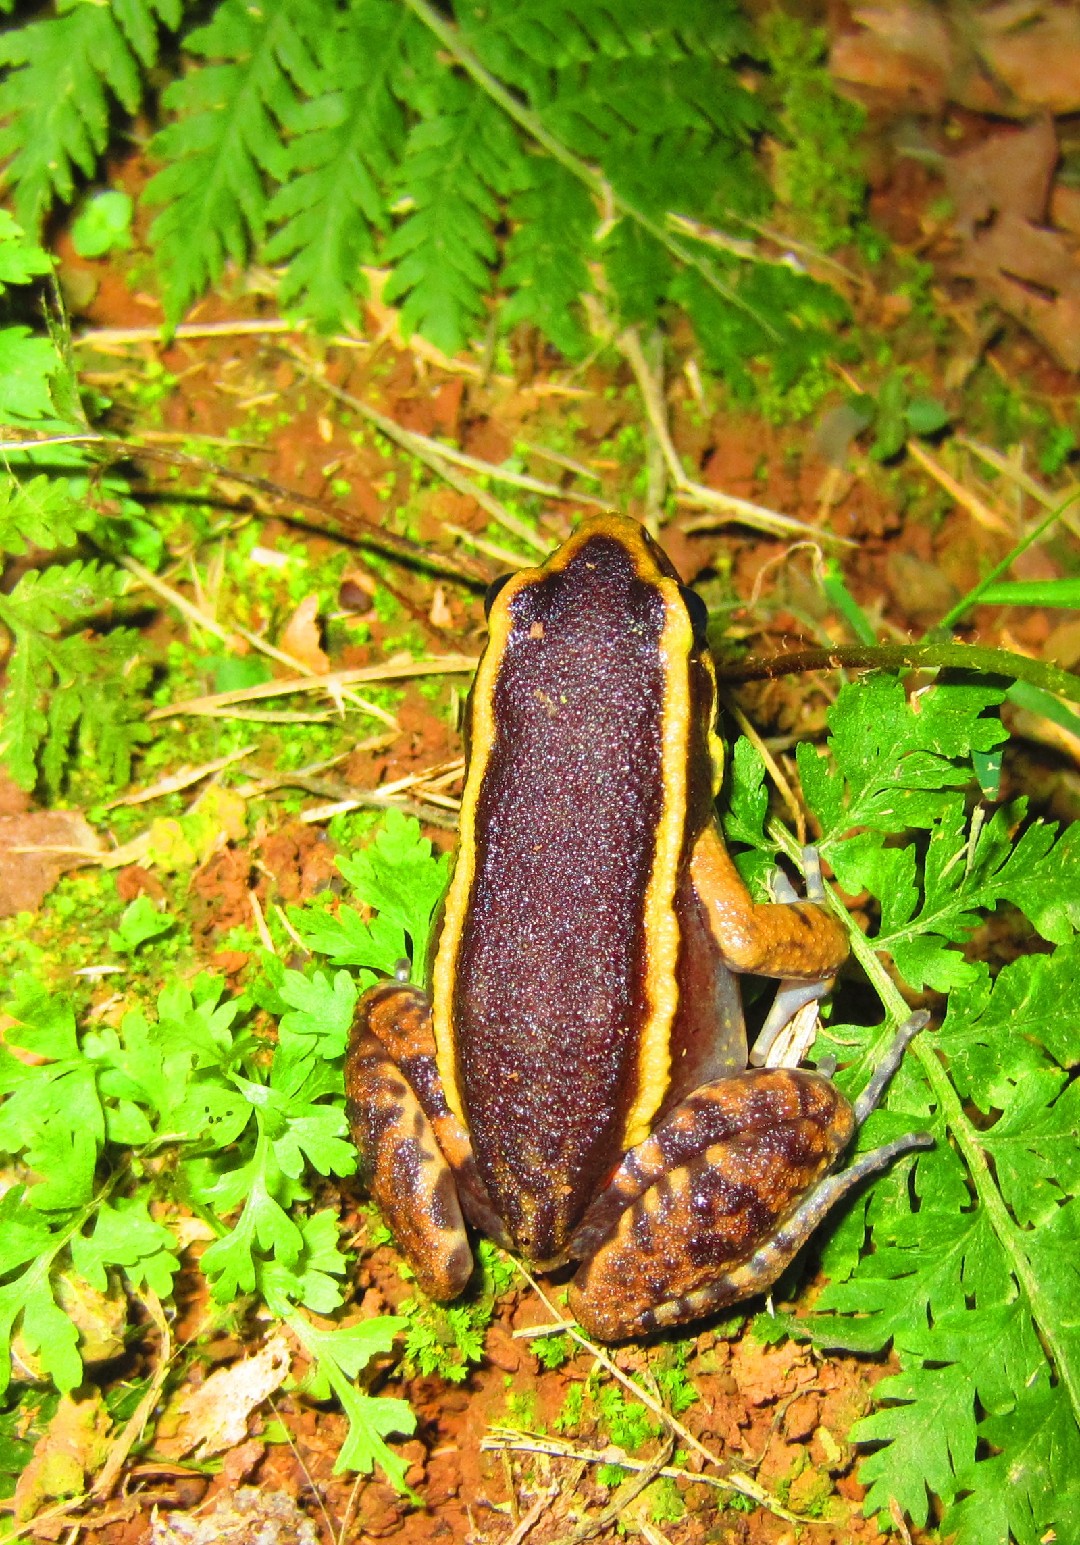 Ditch frogs (Leptodactylus)